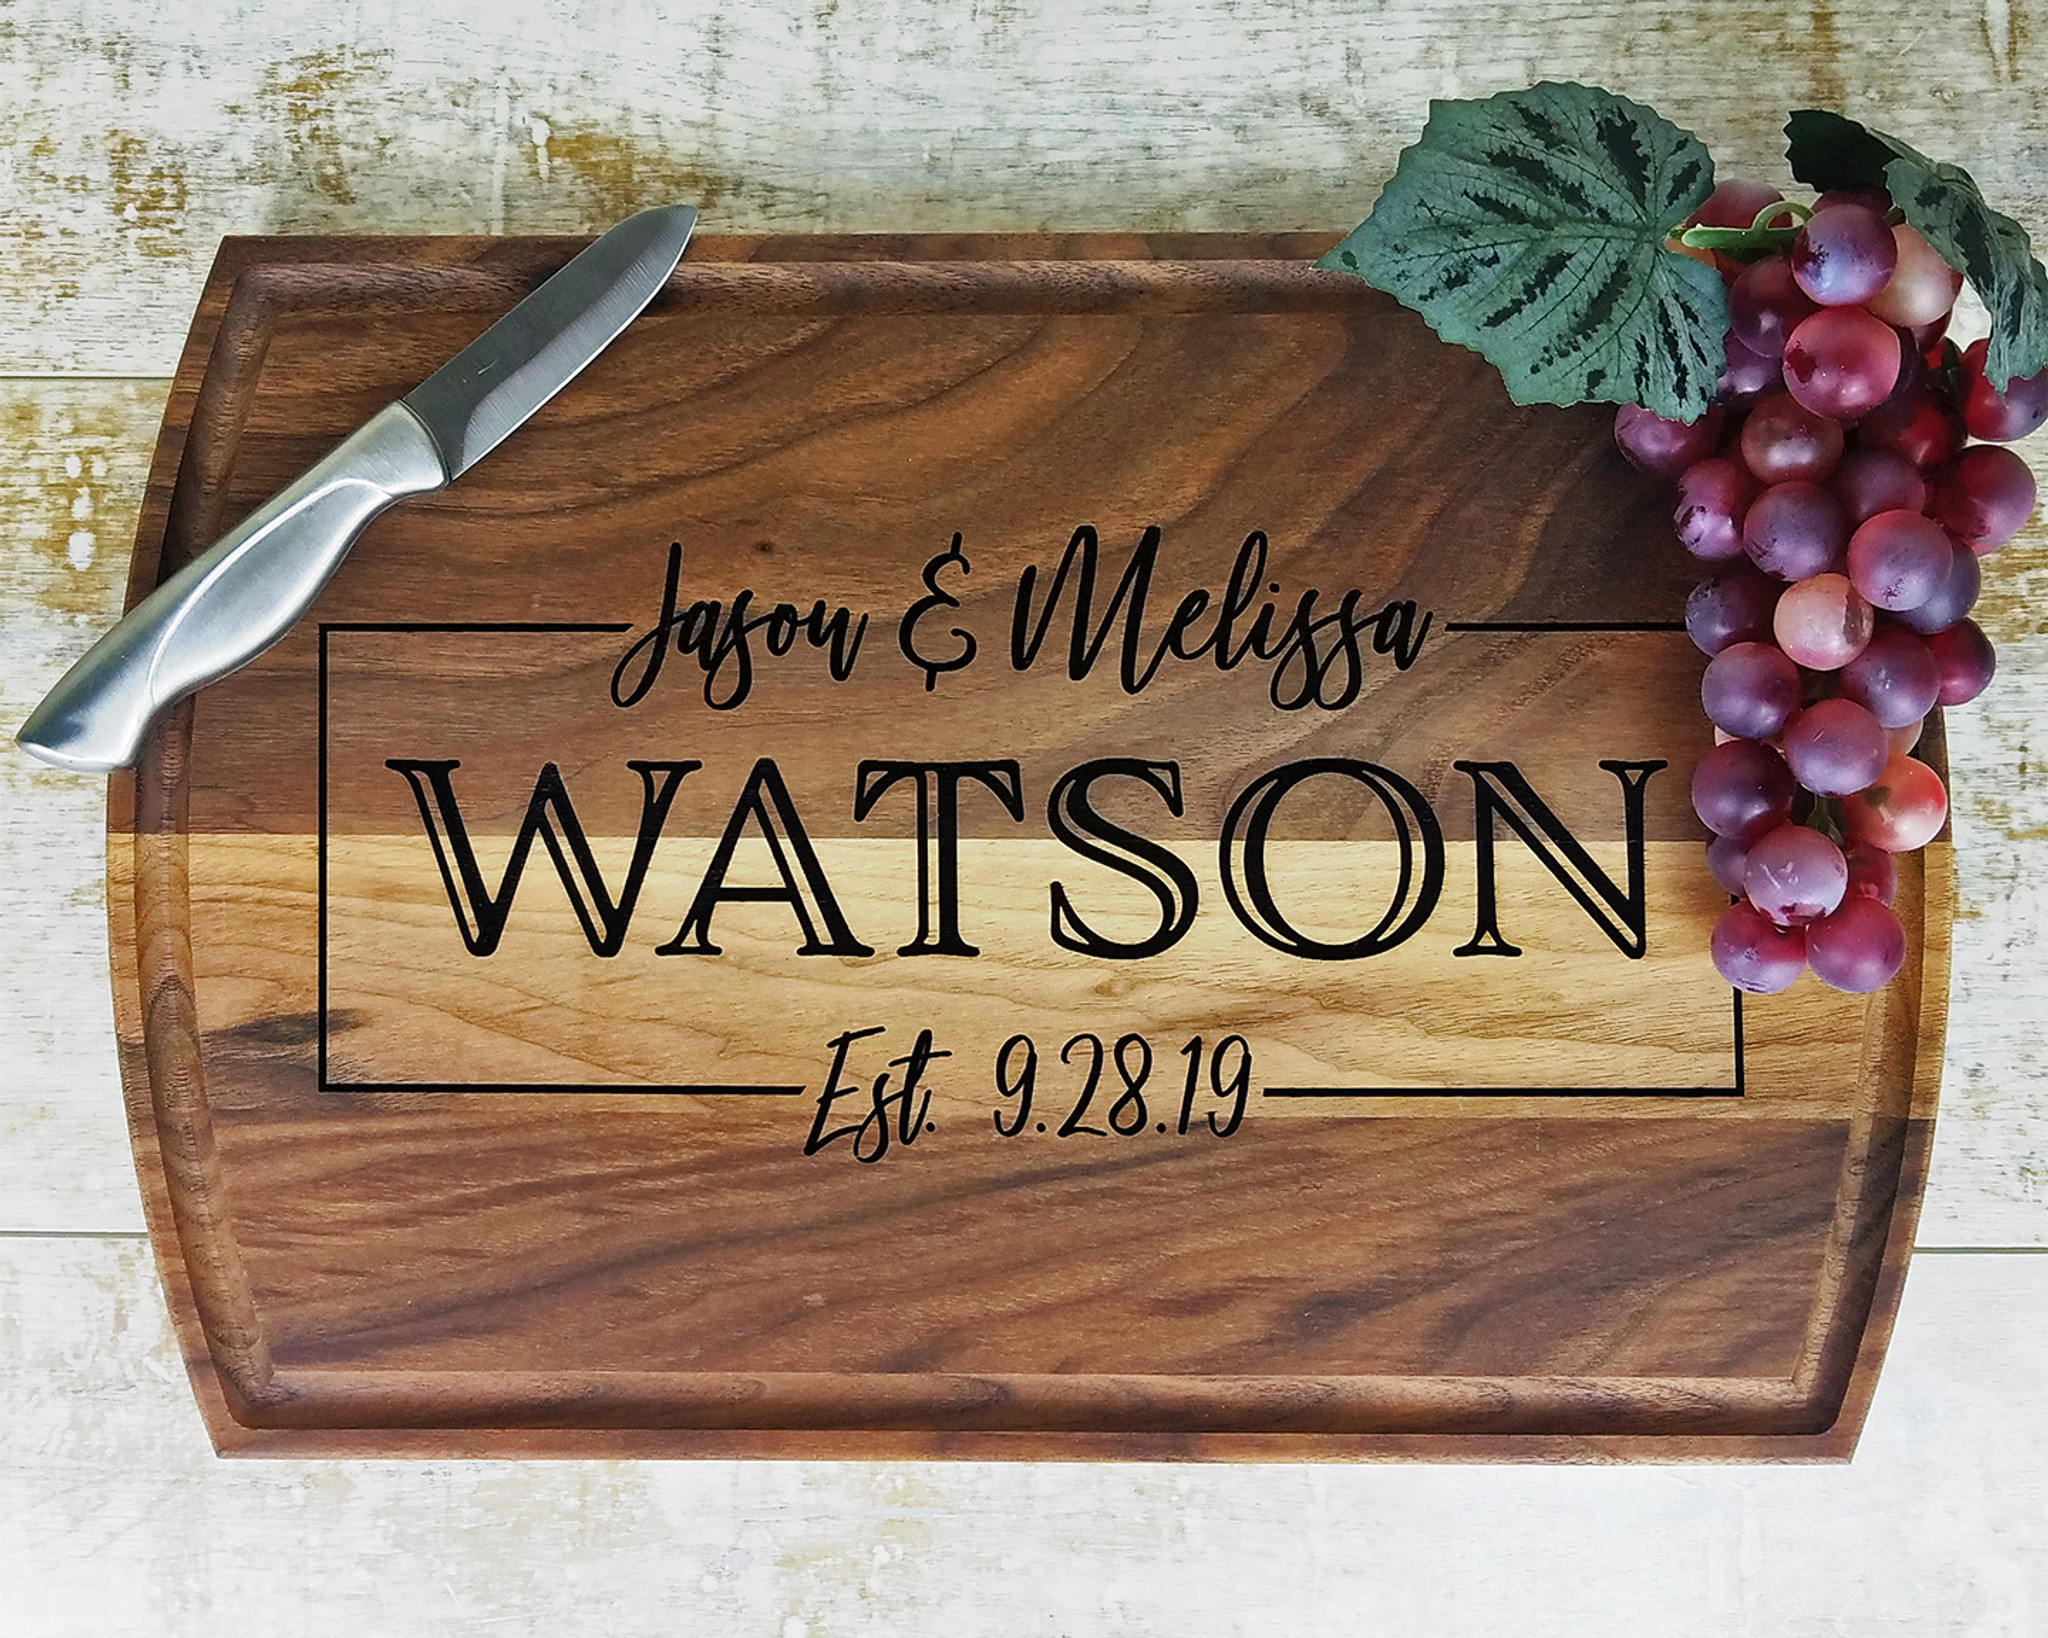 https://cdn11.bigcommerce.com/s-26585/images/stencil/2048x2048/products/319/1645/Personalized_walnut_cutting_boards__78988.1584230739.jpg?c=2